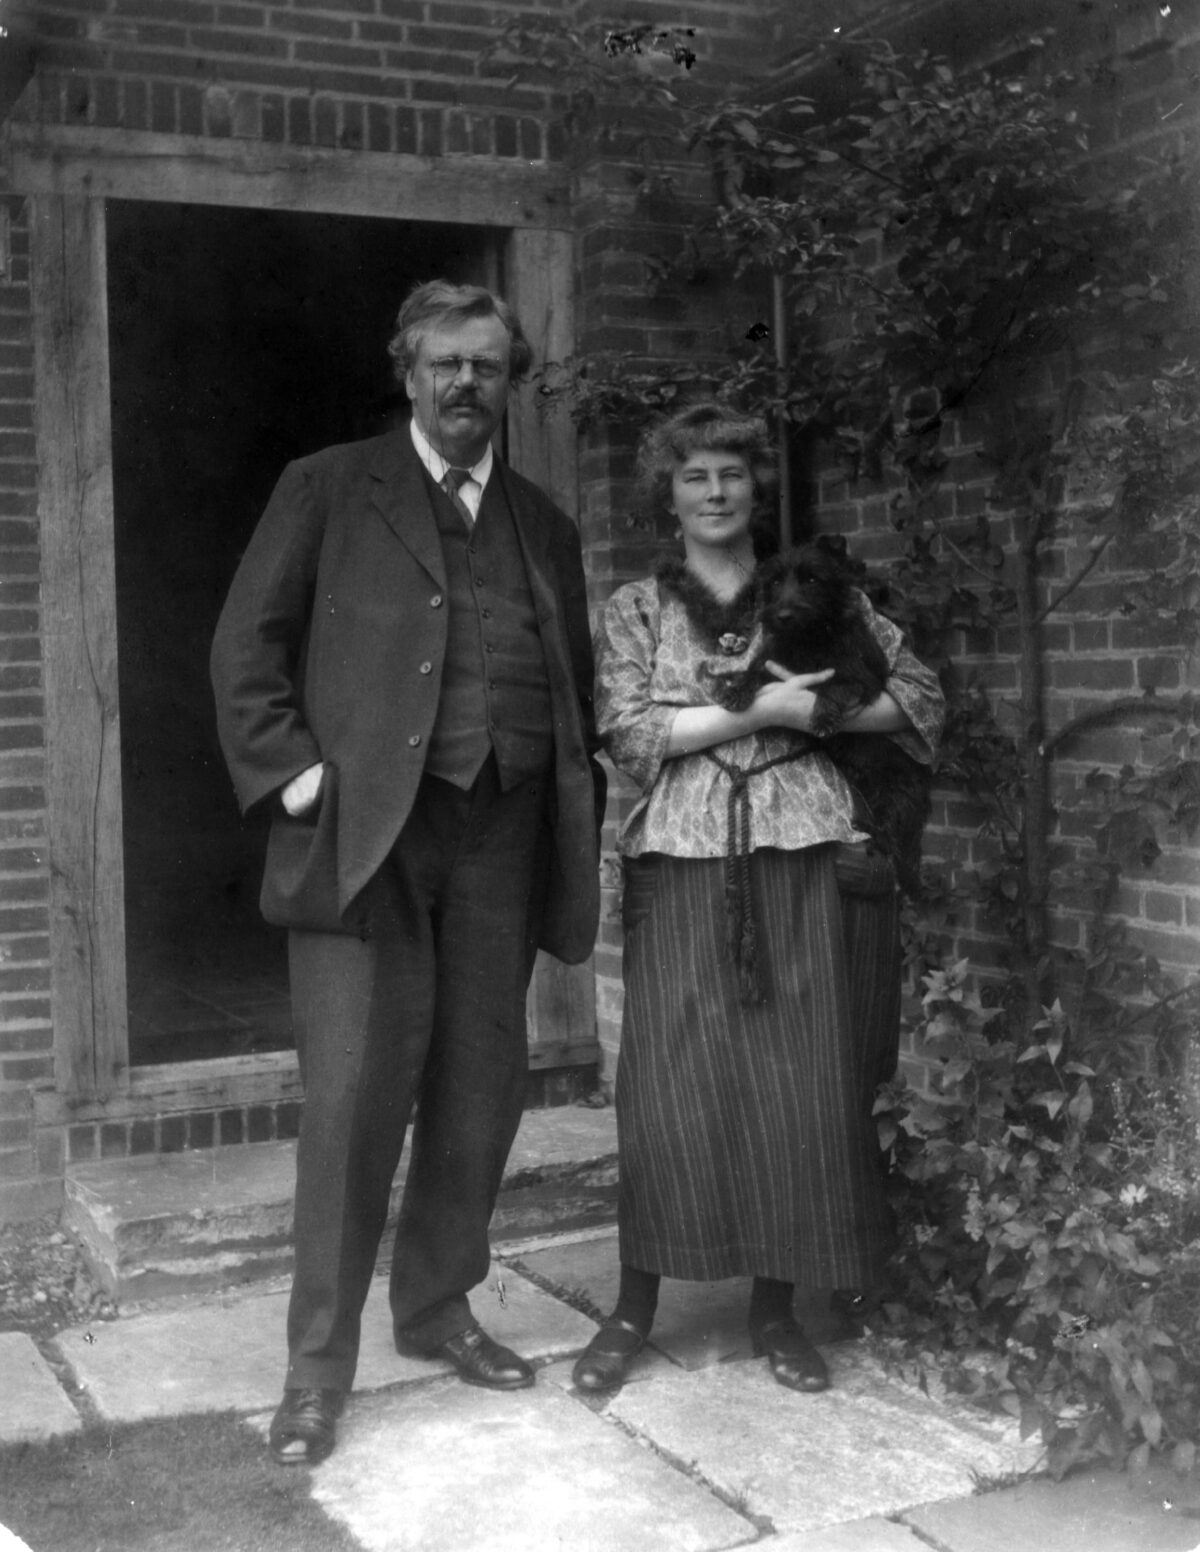 Chesterton and wife